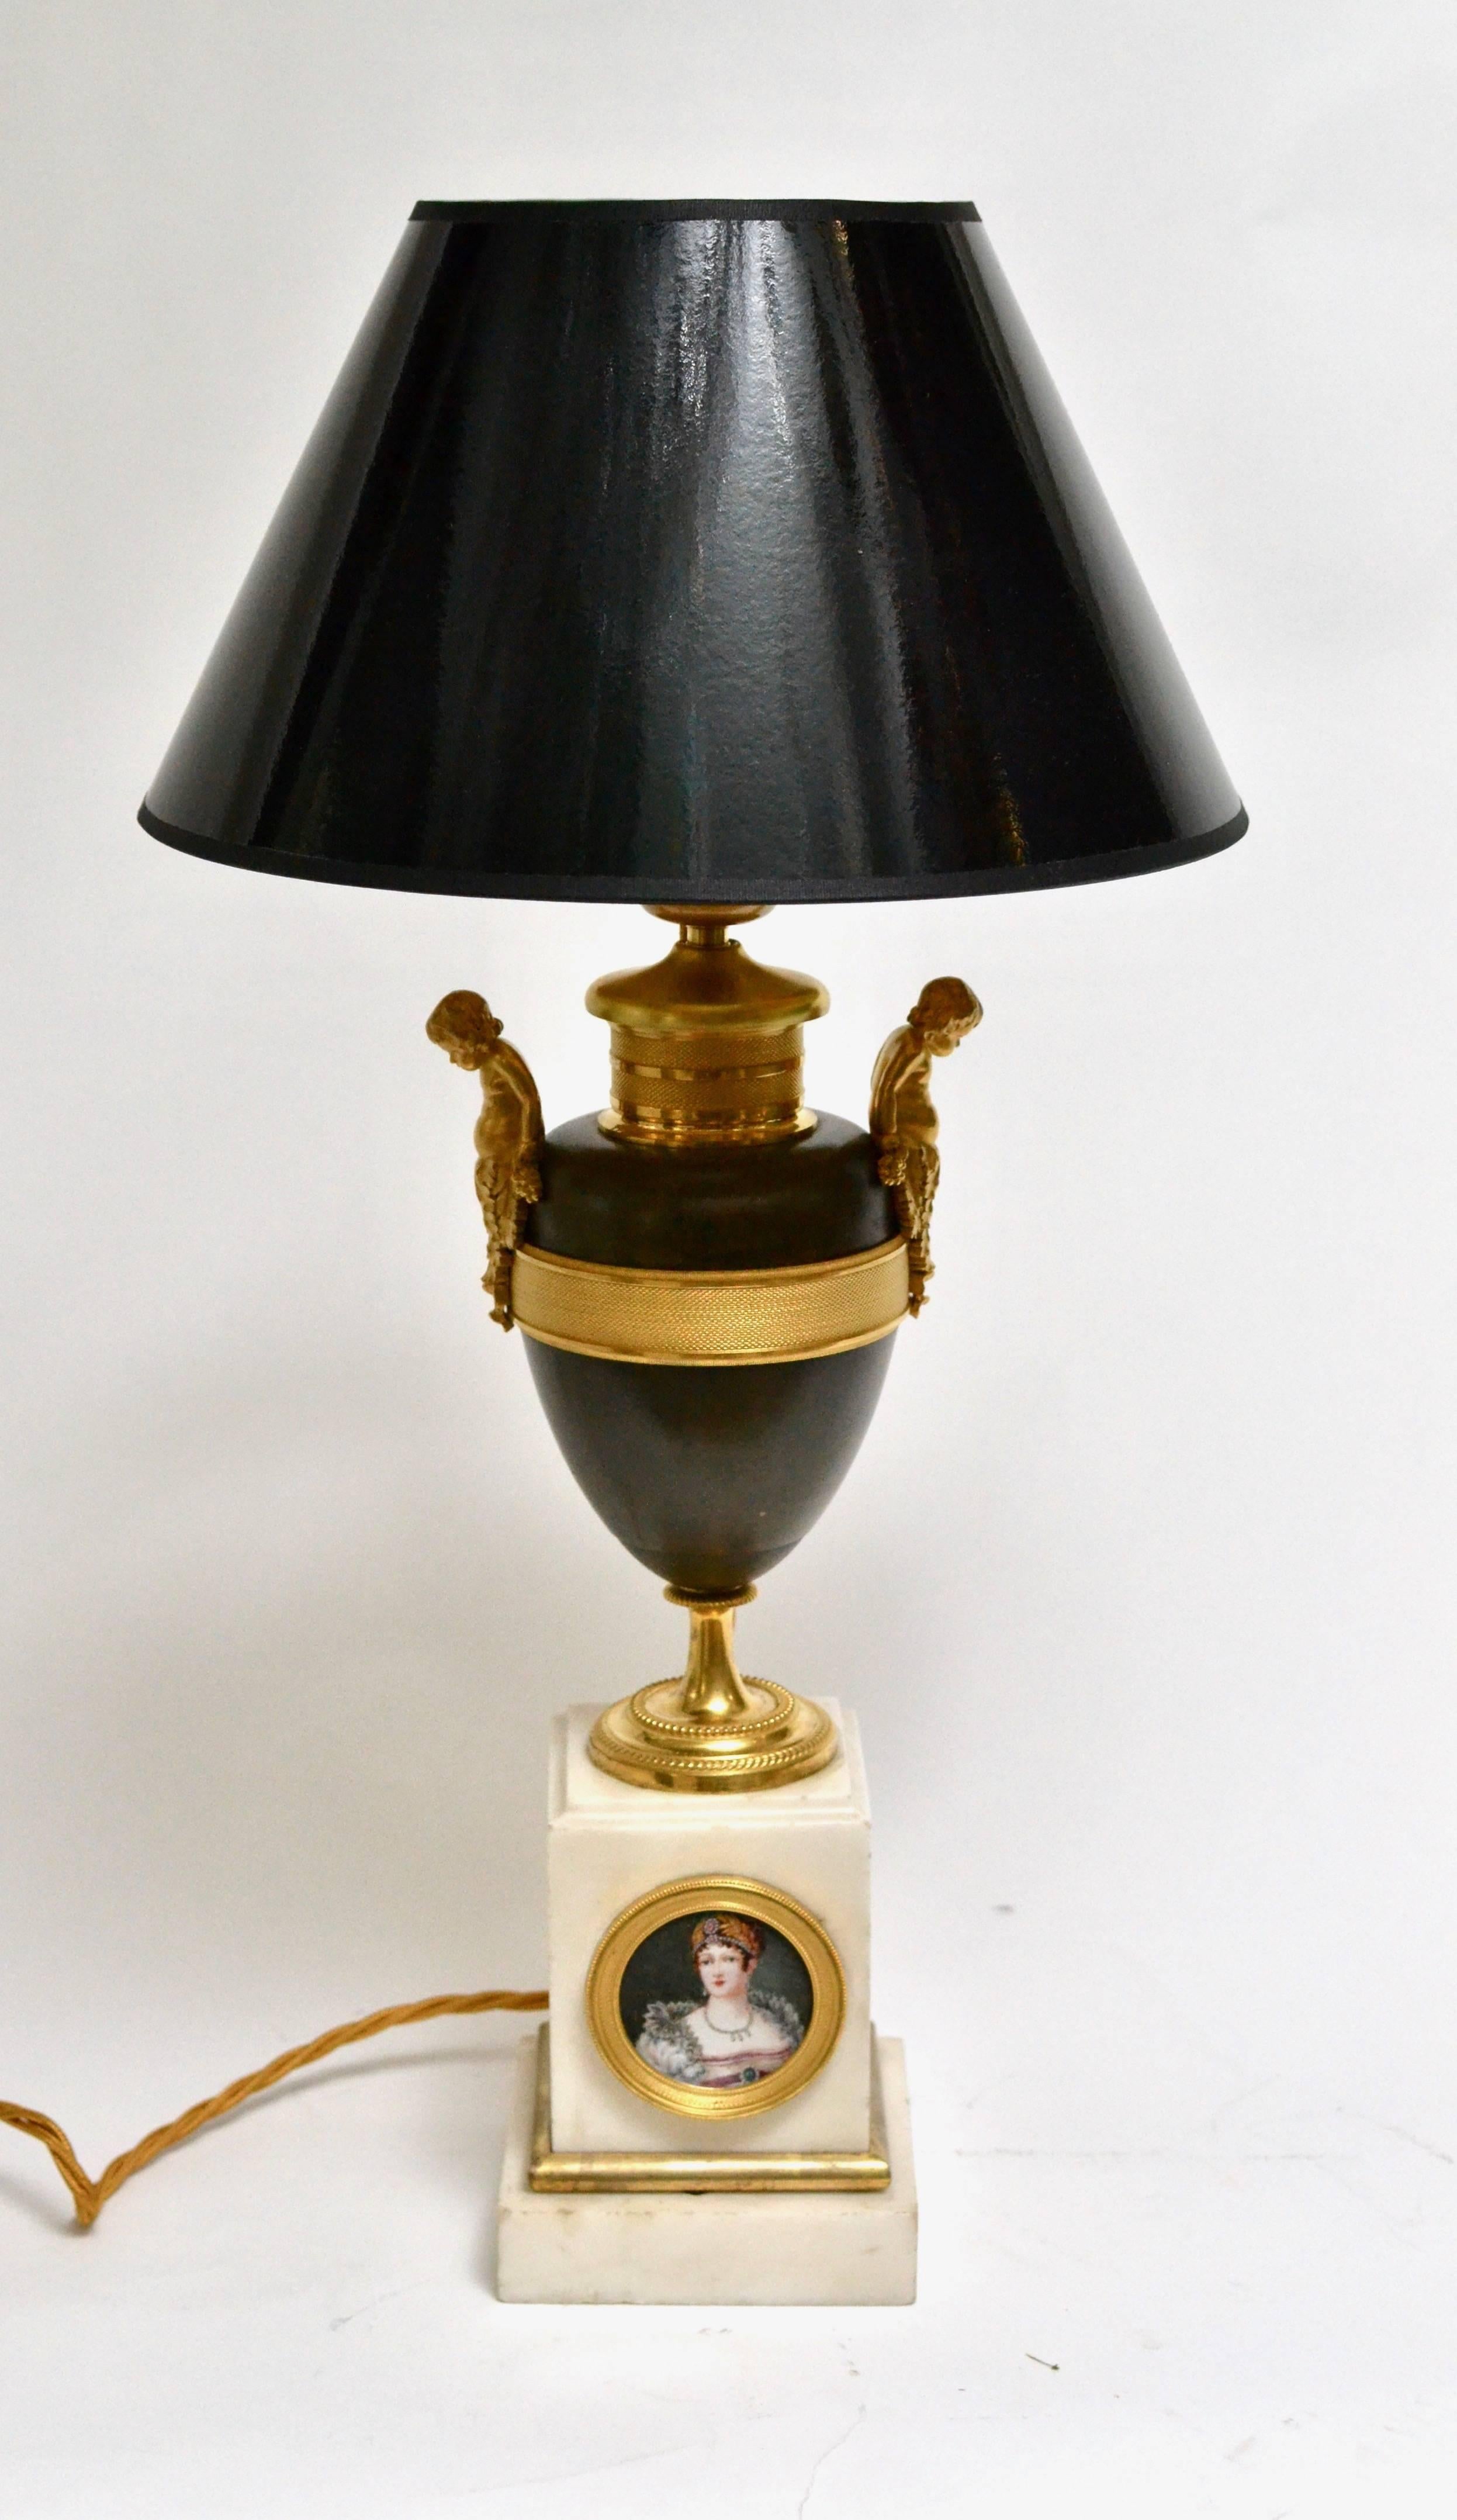 A gilt and patinated Empire bronze urn a white marble base with a painted miniature of empress Josephine (1763-1814), Napoleons first wife. Now mounted as a lamp.